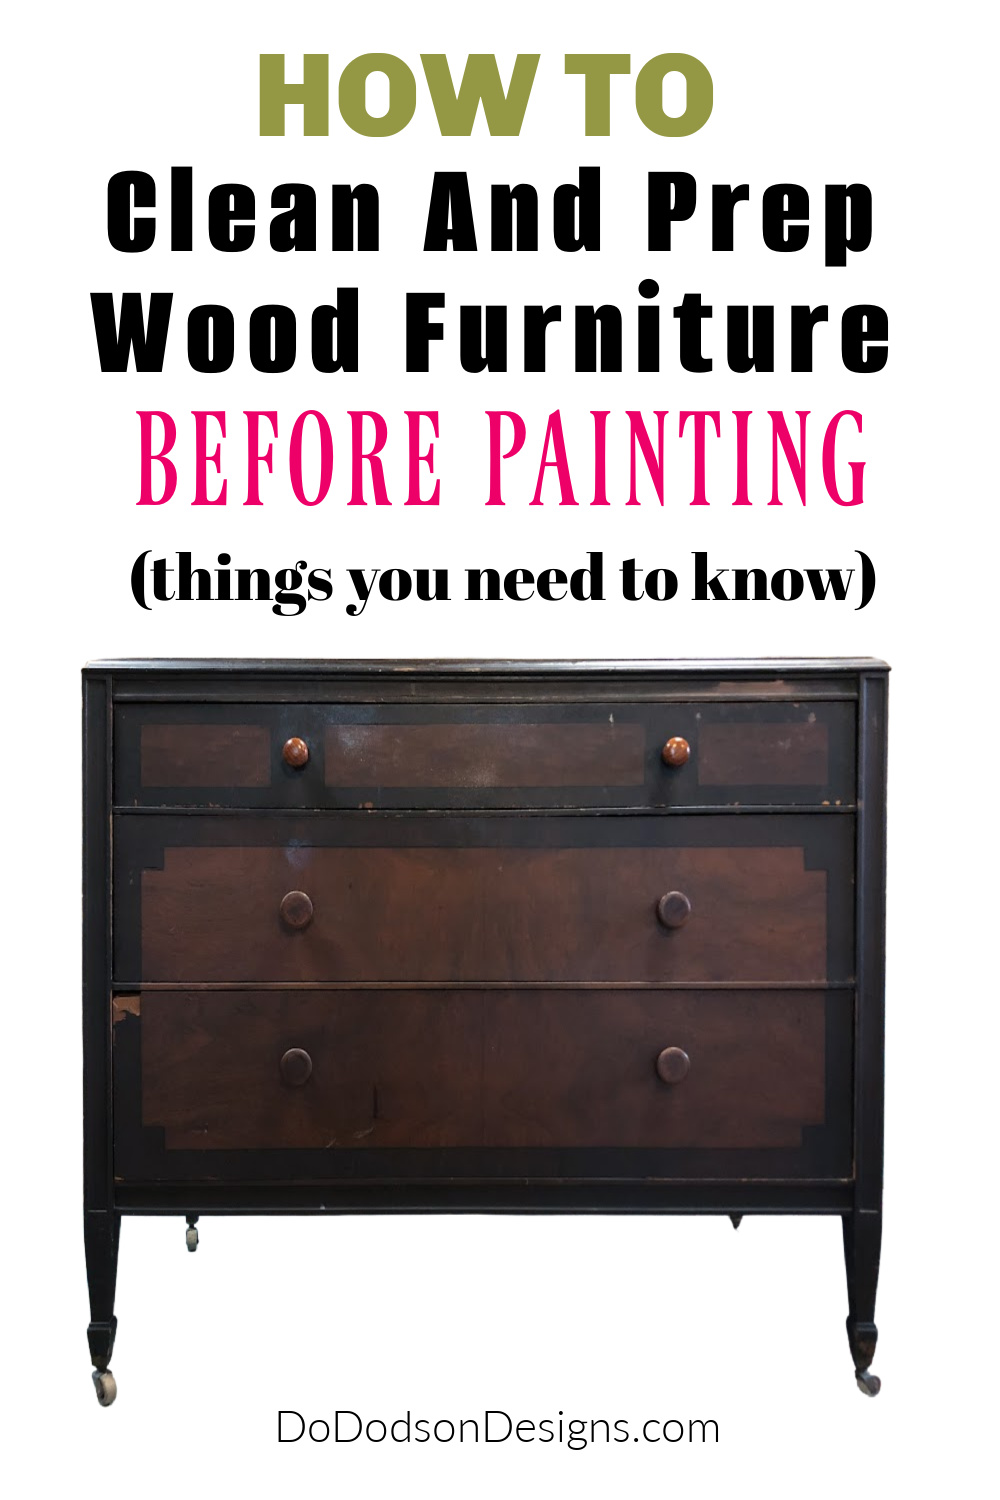 Best Paint For Furniture DIY Projects - My Creative Days